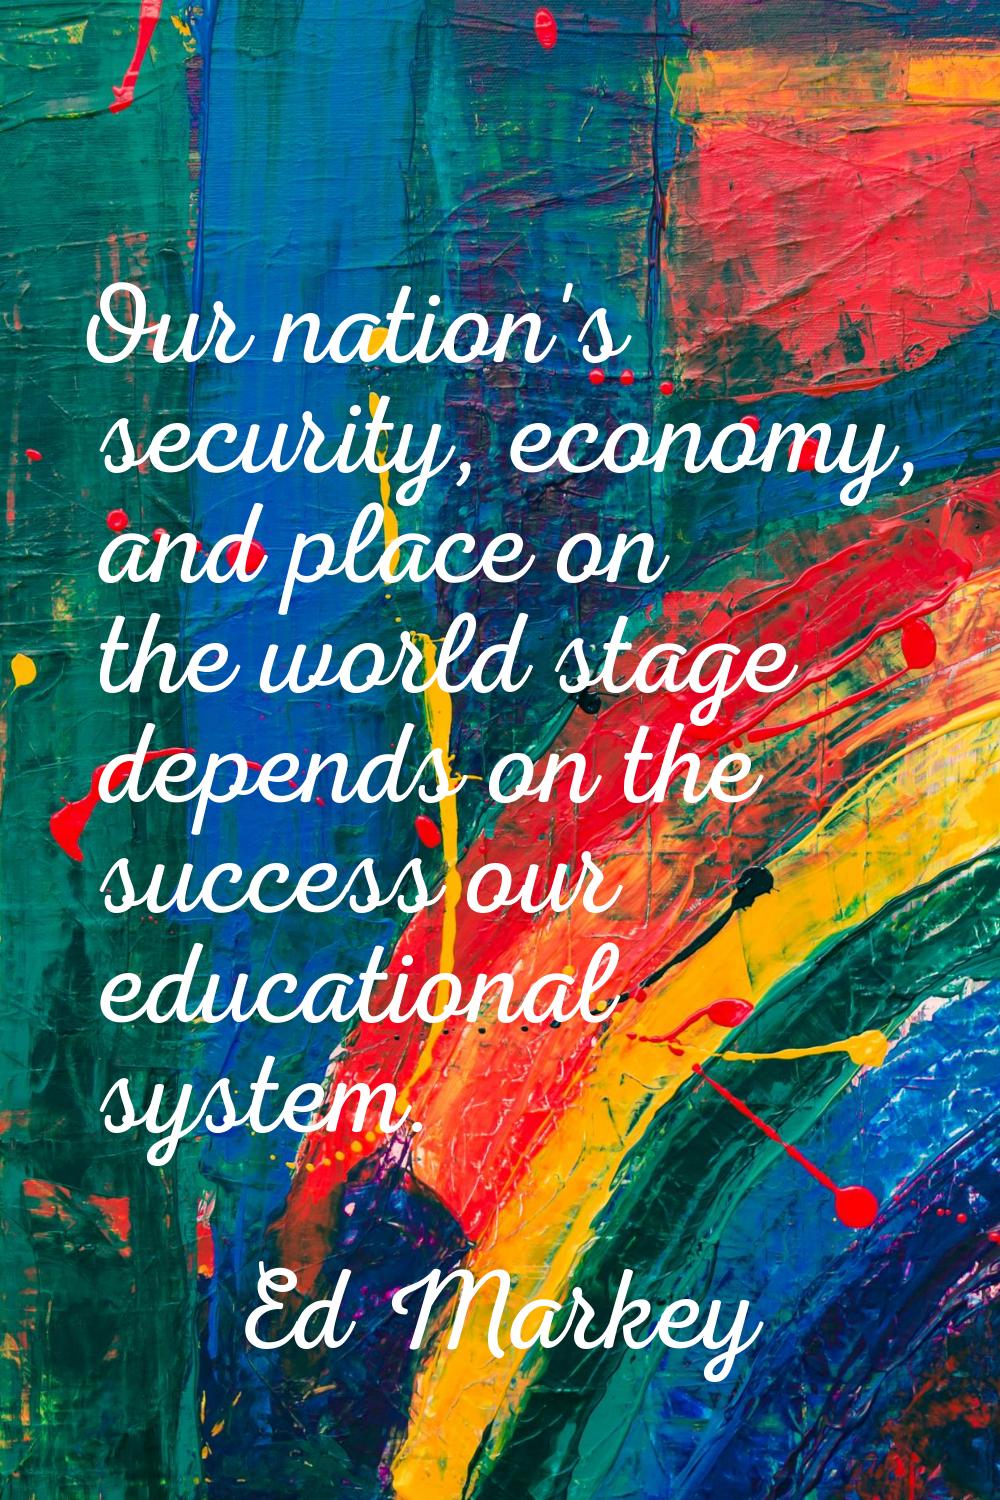 Our nation's security, economy, and place on the world stage depends on the success our educational